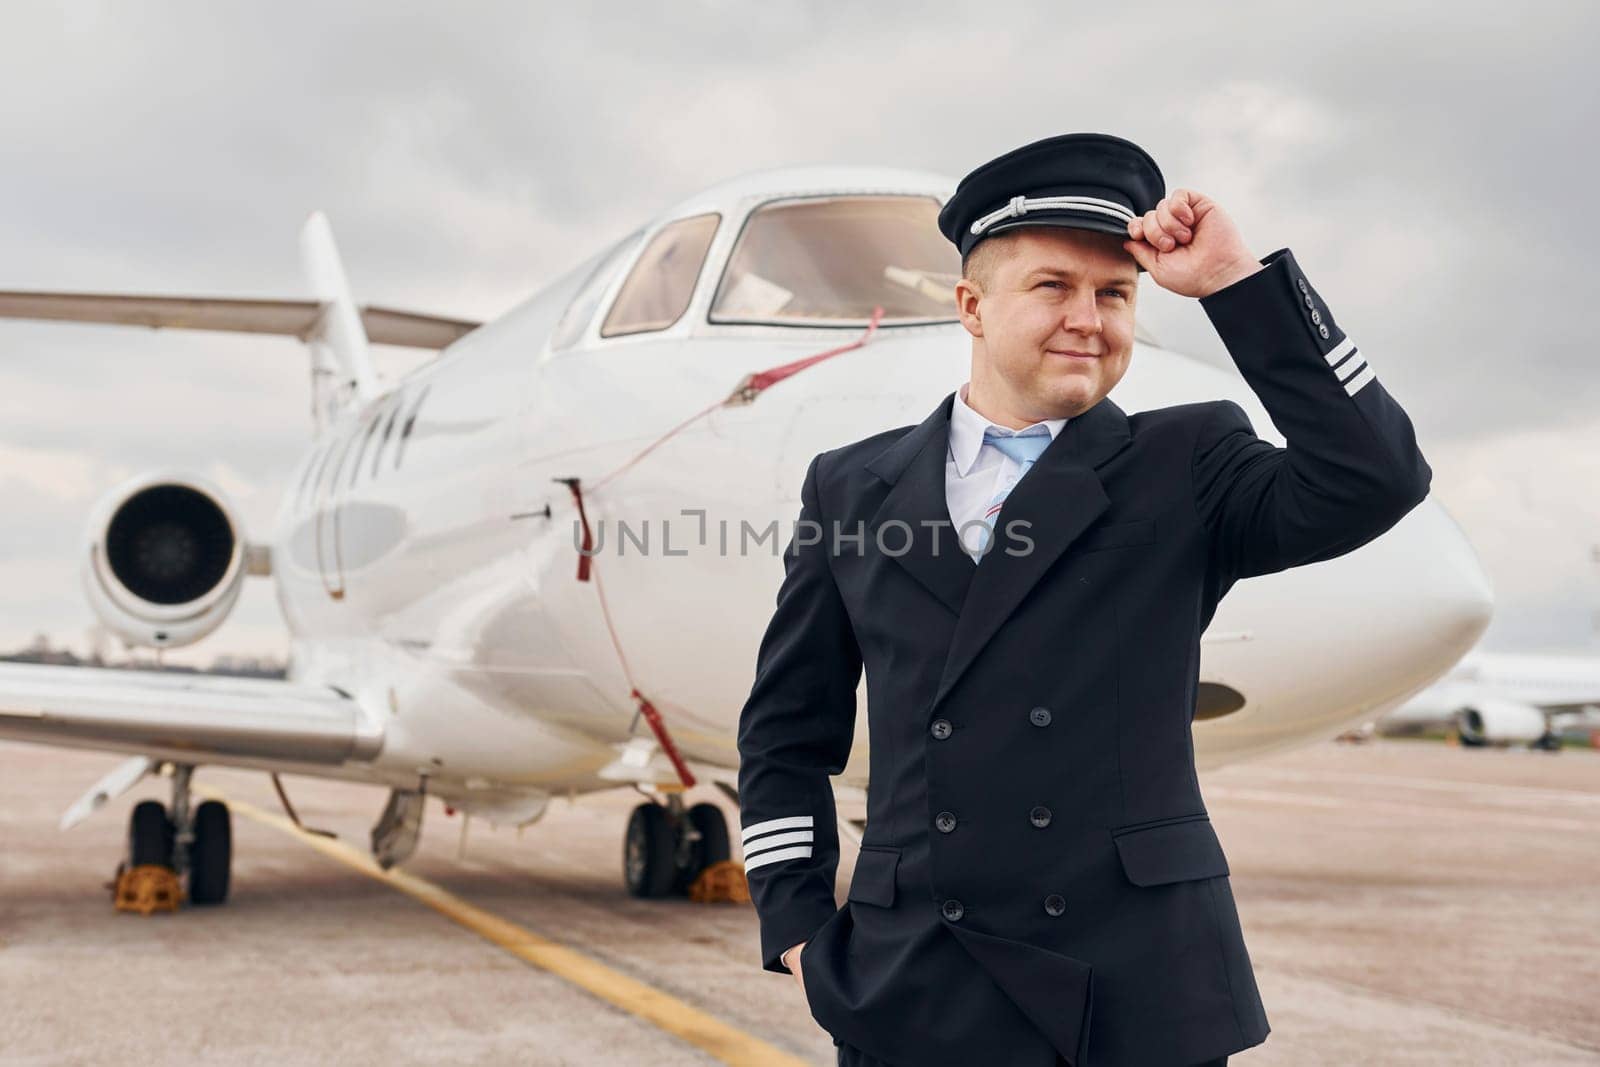 Posing for a camera. Experienced pilot in uniform standing outside near plane by Standret